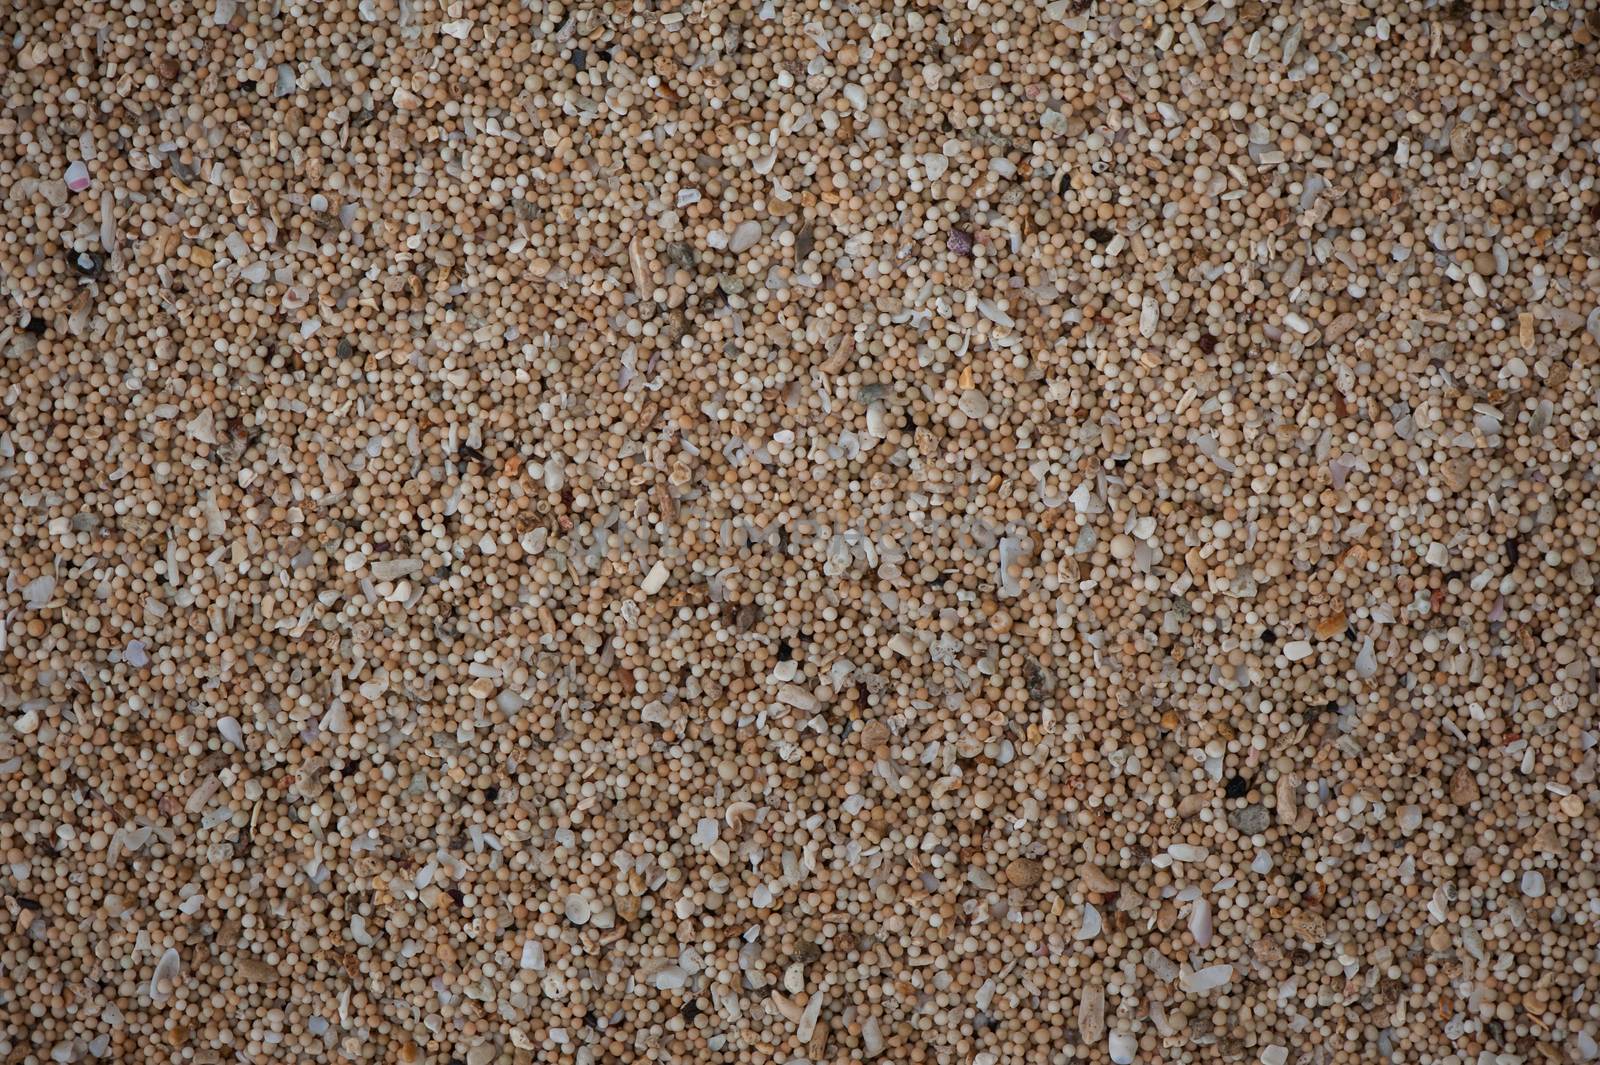 Seaside sand that with close-up view turns out to be a coral debris processed by the ocean, formed into tiny balls. Together with the broken shells it creates the conceptual depiction of plurality, multiplicity and complexity. Uluwatu beach, Bali, Indonesia.